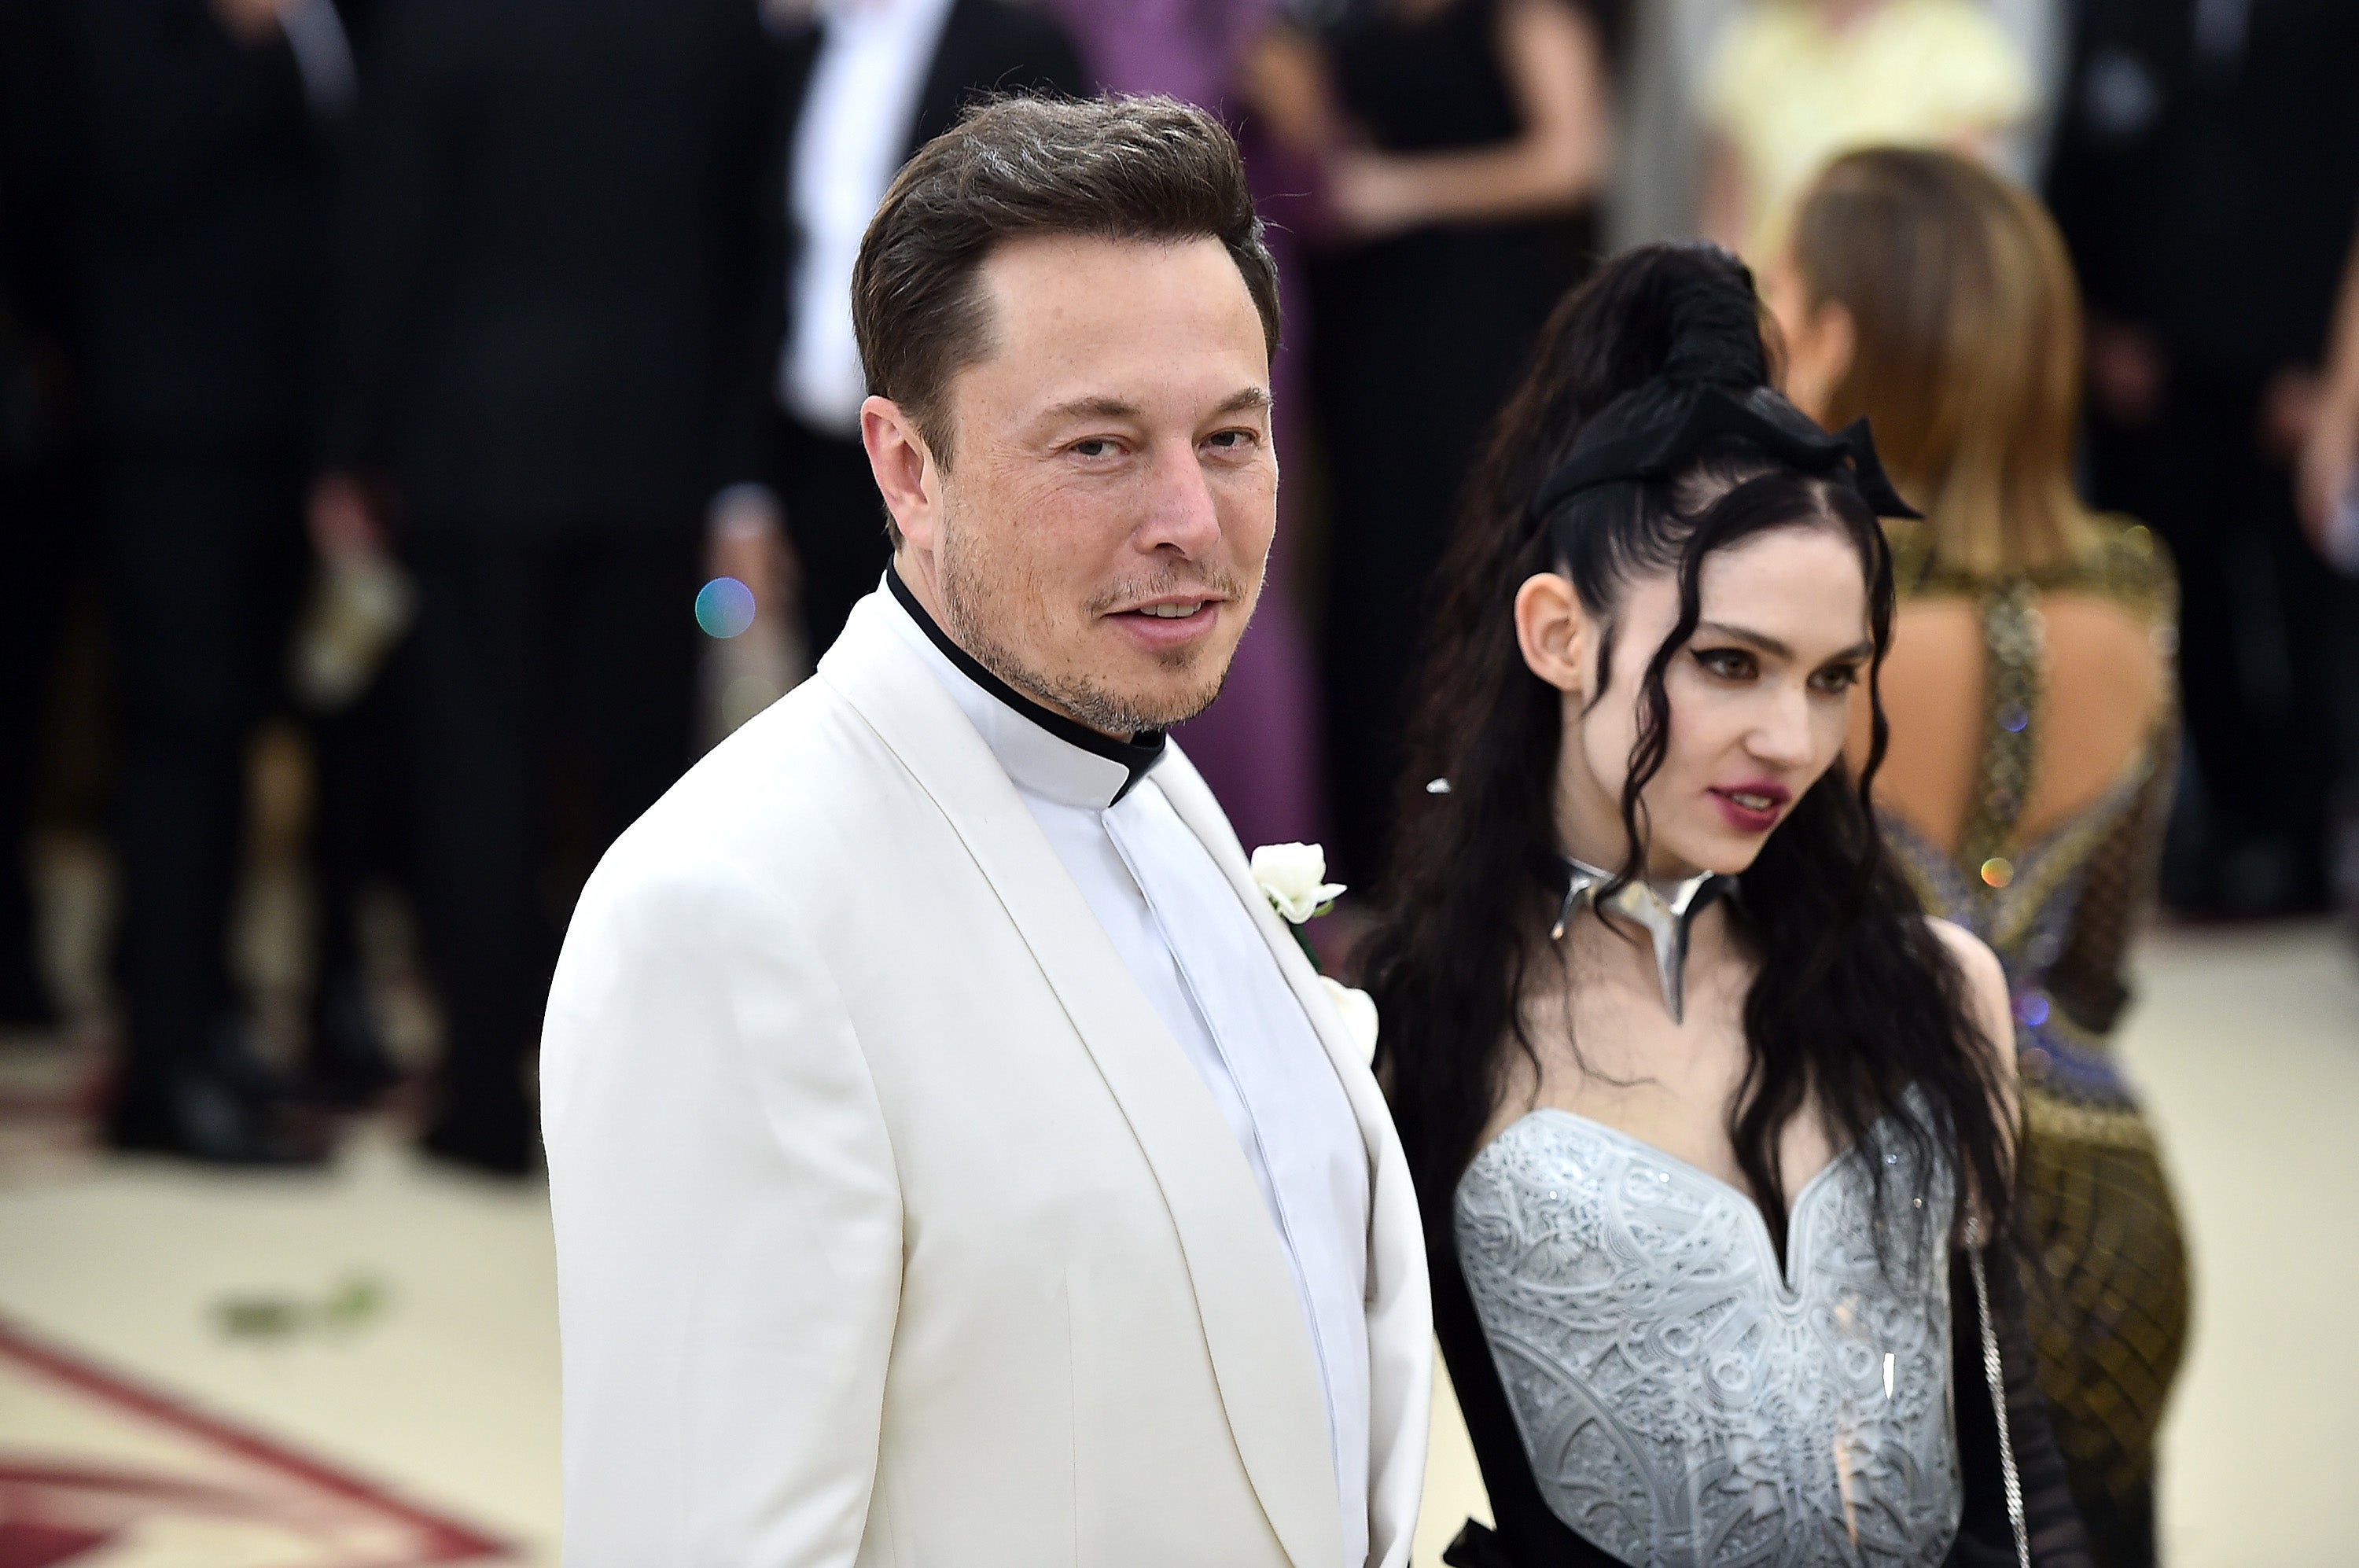 Elon Musk and Grimes at the Met Gala together in 2018